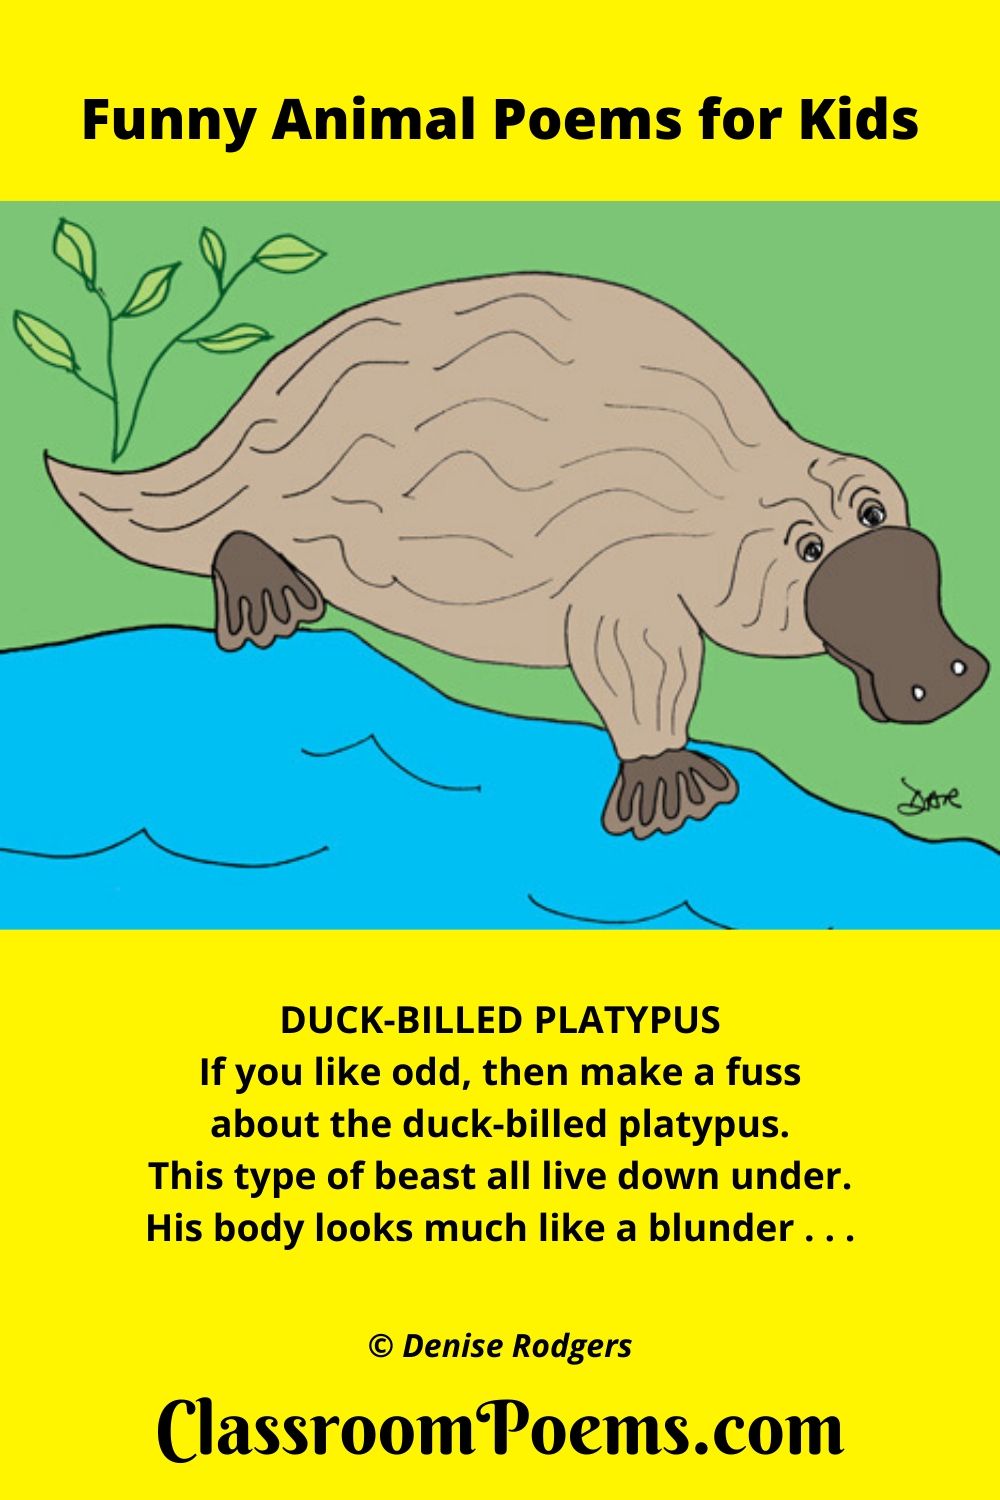 Duck-billed Platypus, a funny animal poem for kids by Denise Rodgers on ClassroomPoems.com.